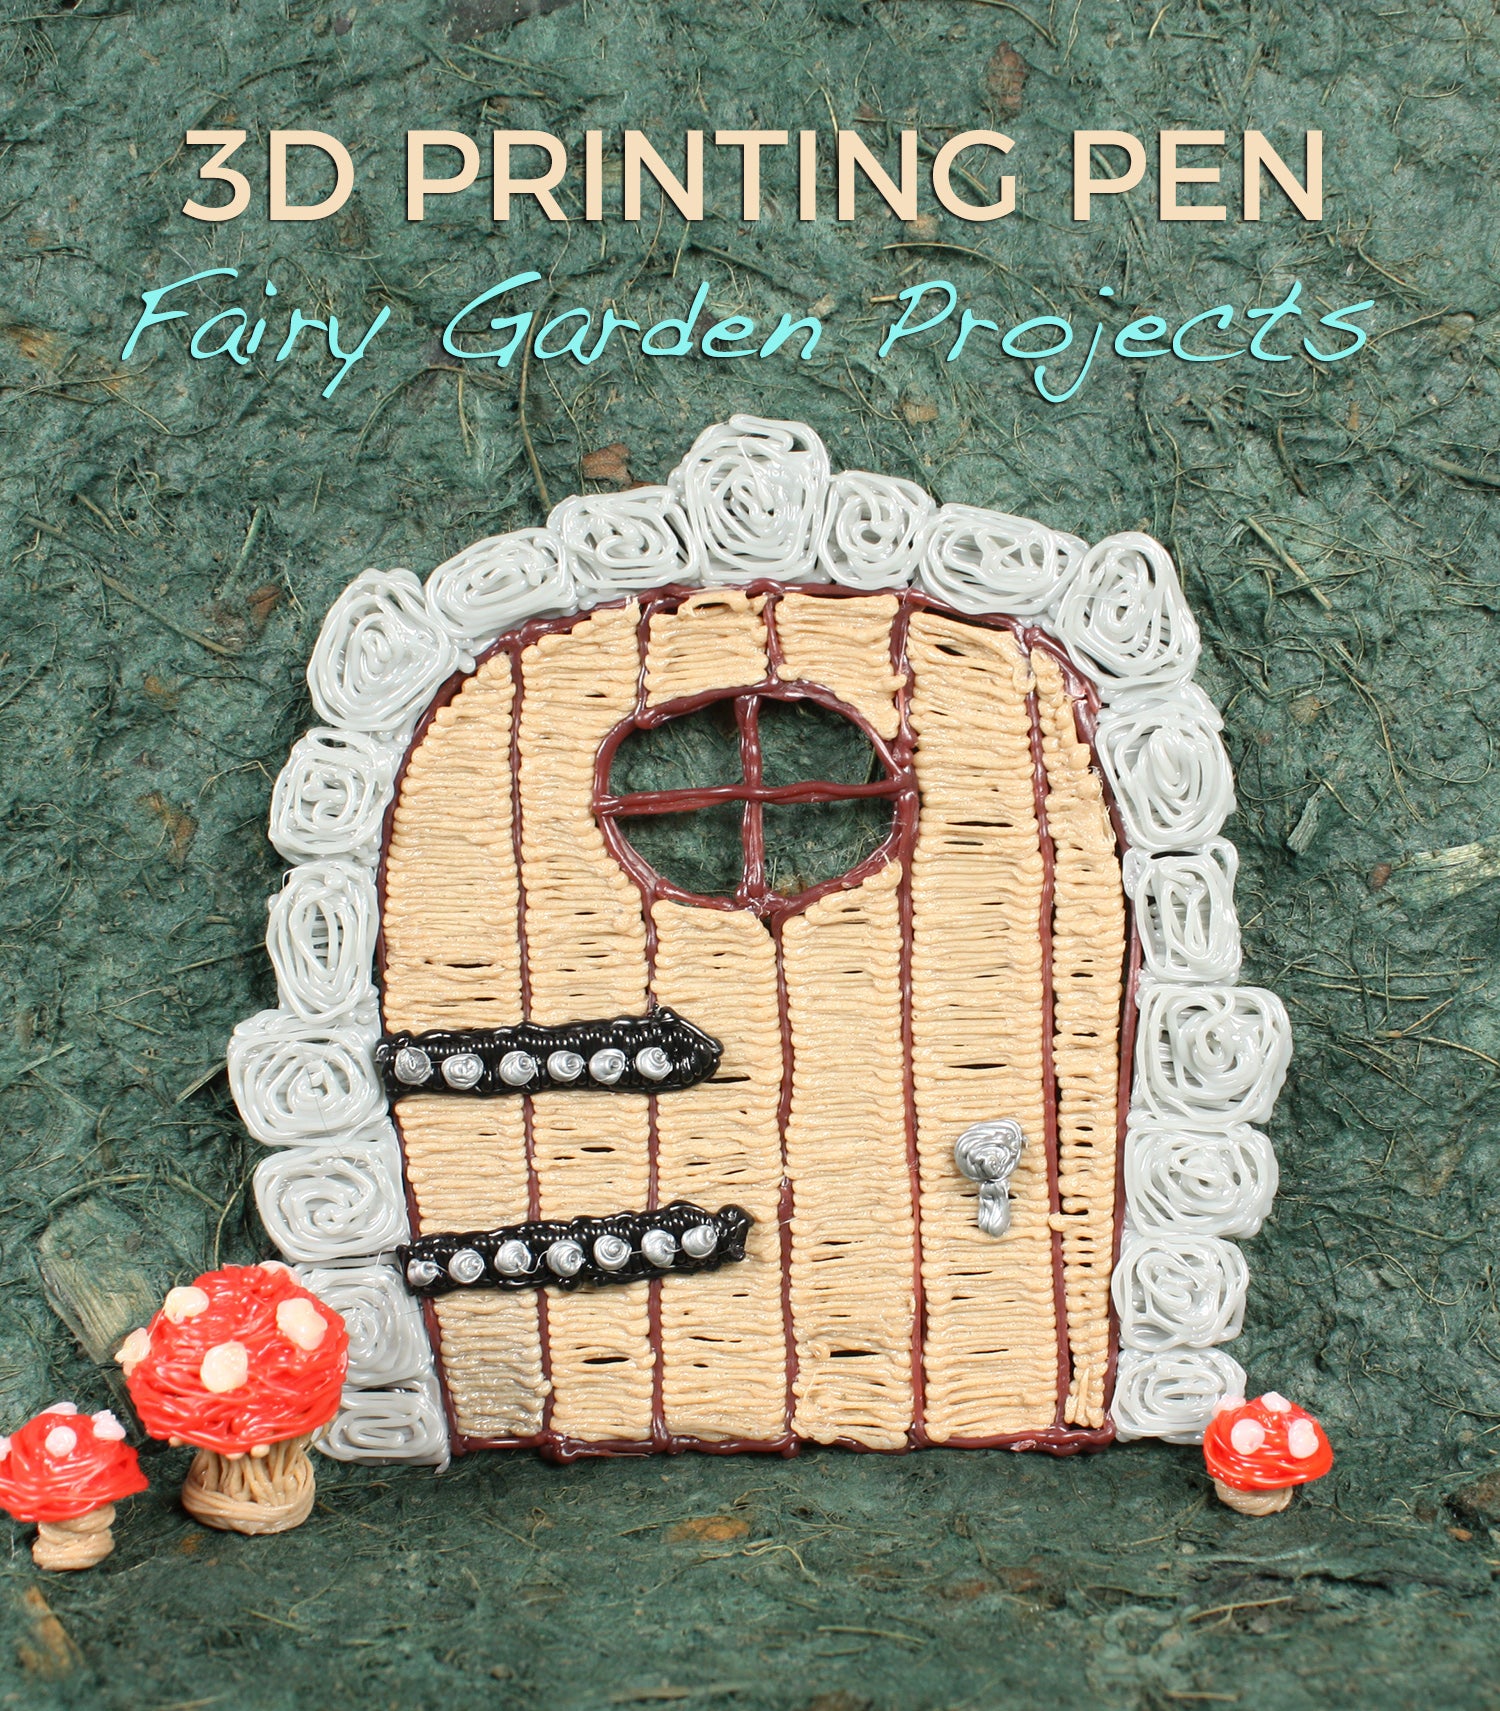 7 Fairy Garden Projects to Make with a 3D Pen